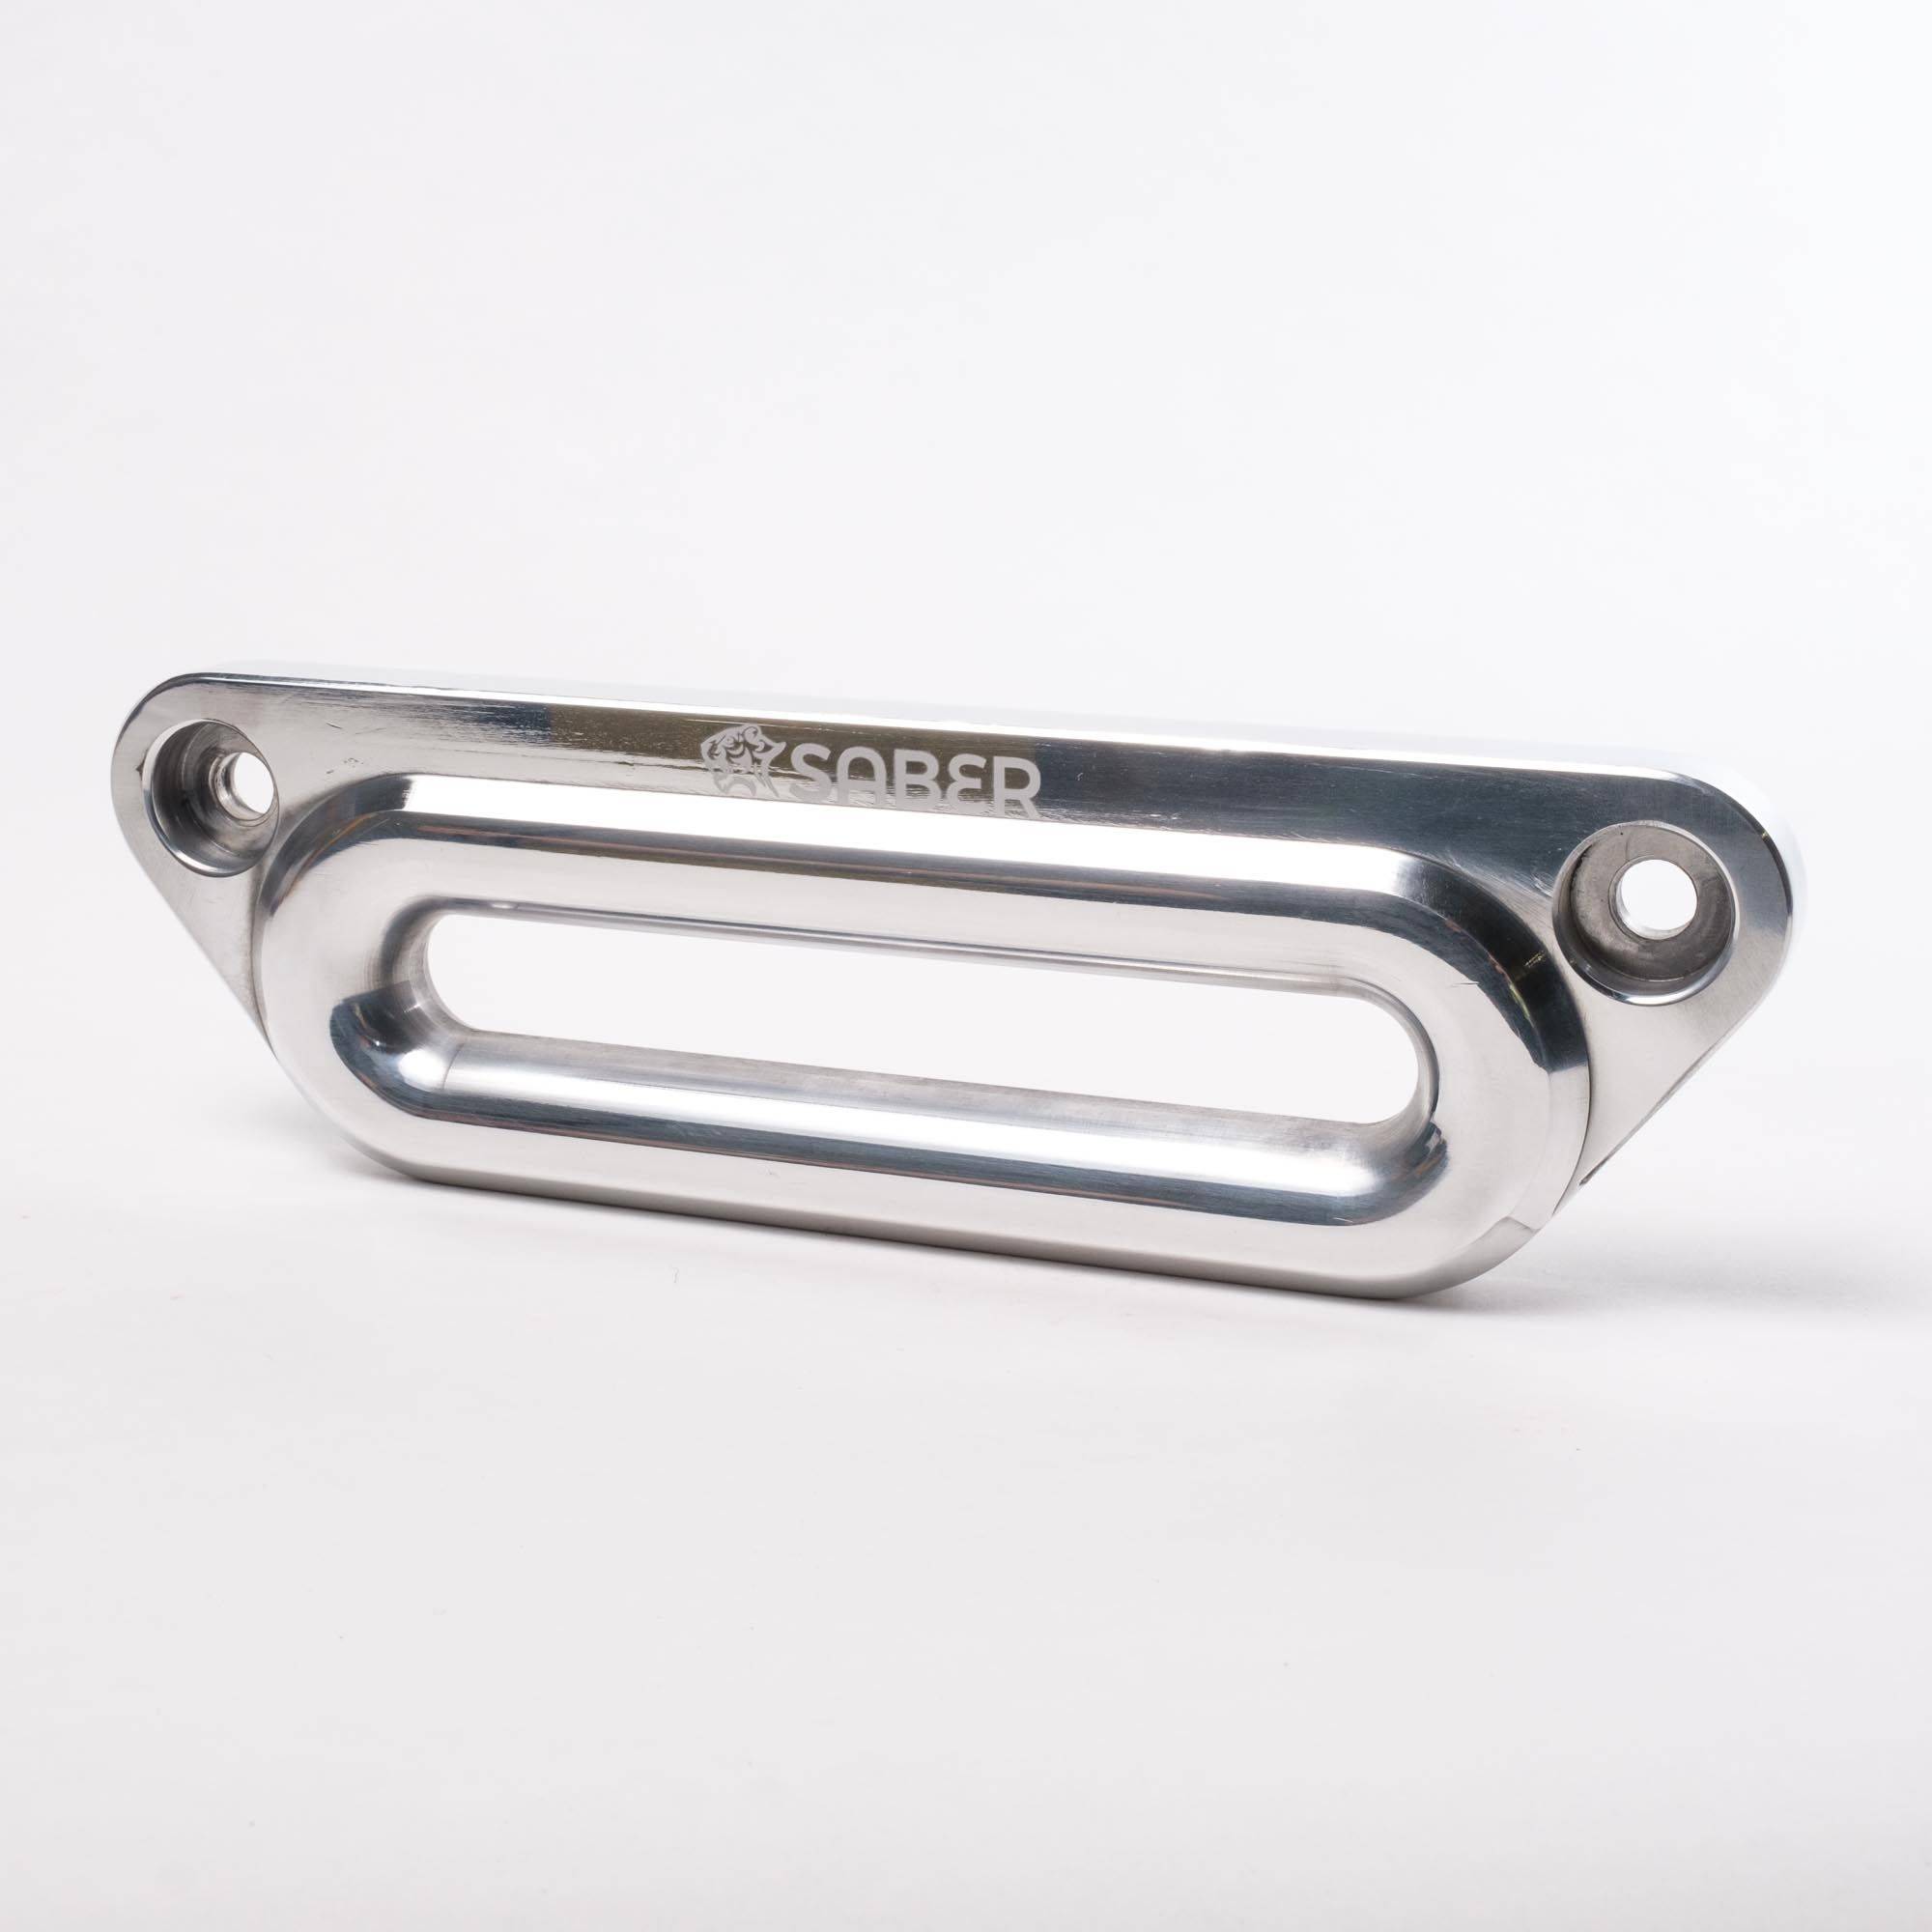 Saber Offroad 6061 Aluminium Offset Fairlead – Polished Alloy | Saber Offroad